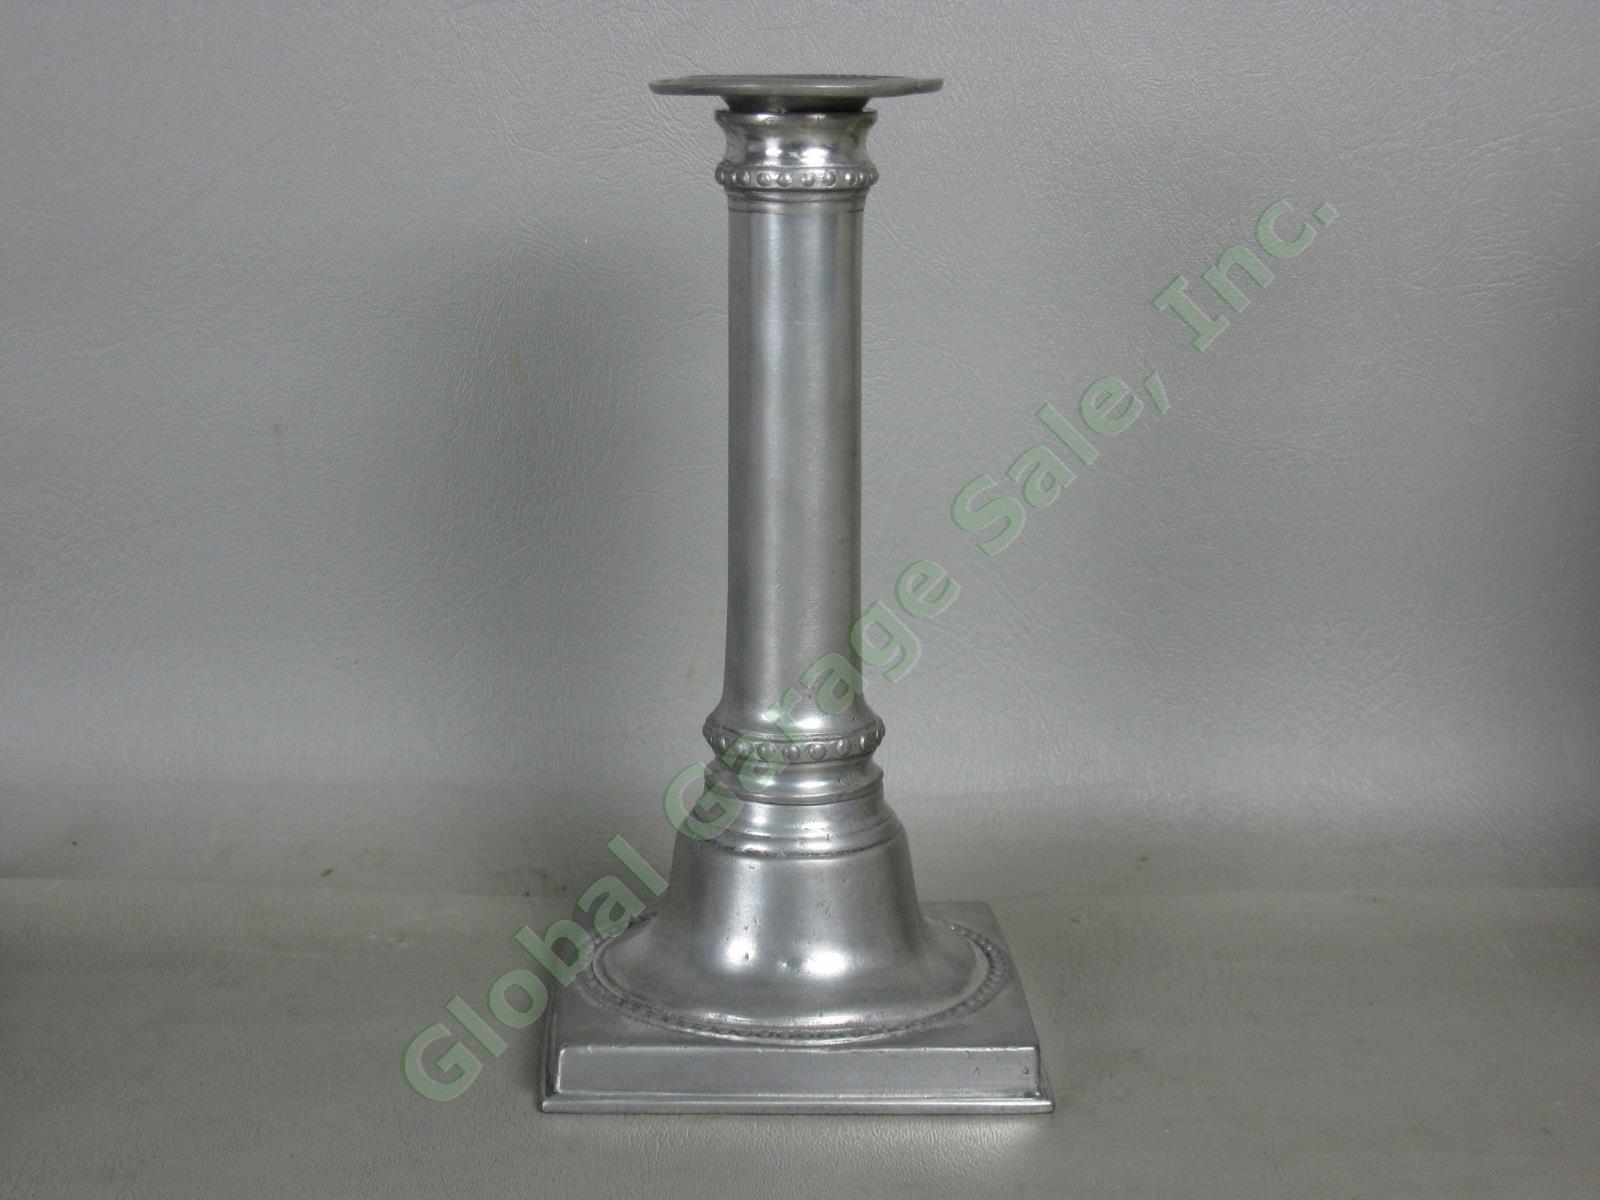 NEW Match Pewter Square Base 8" Candlestick Candle Holder Made In Italy $200 NR! 1